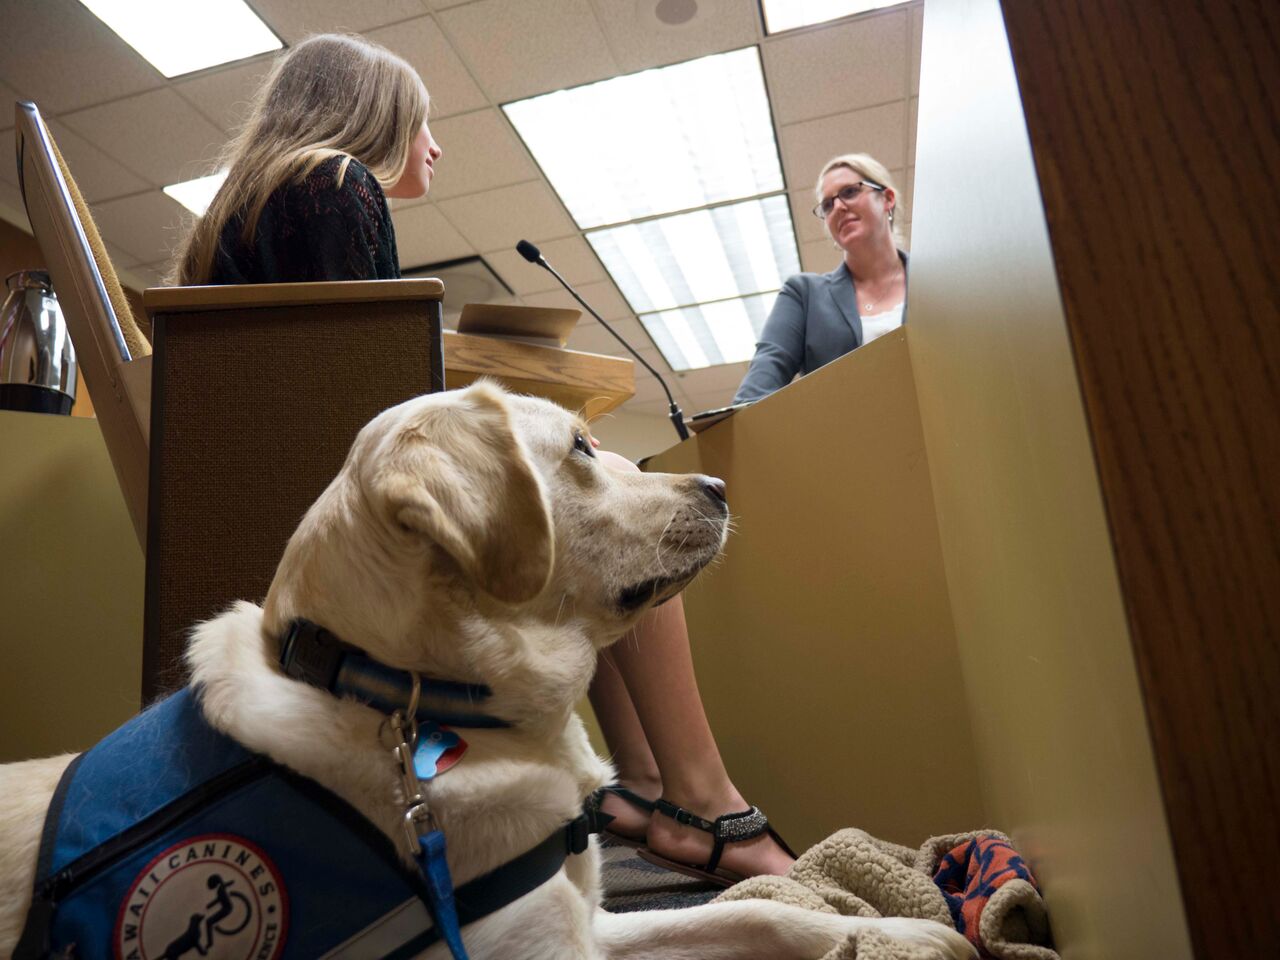 Courthouse facility dog. By David Walsen [CC BY-SA 3.0 (https://creativecommons.org/licenses/by-sa/3.0) or GFDL (http://www.gnu.org/copyleft/fdl.html)], via Wikimedia Commons